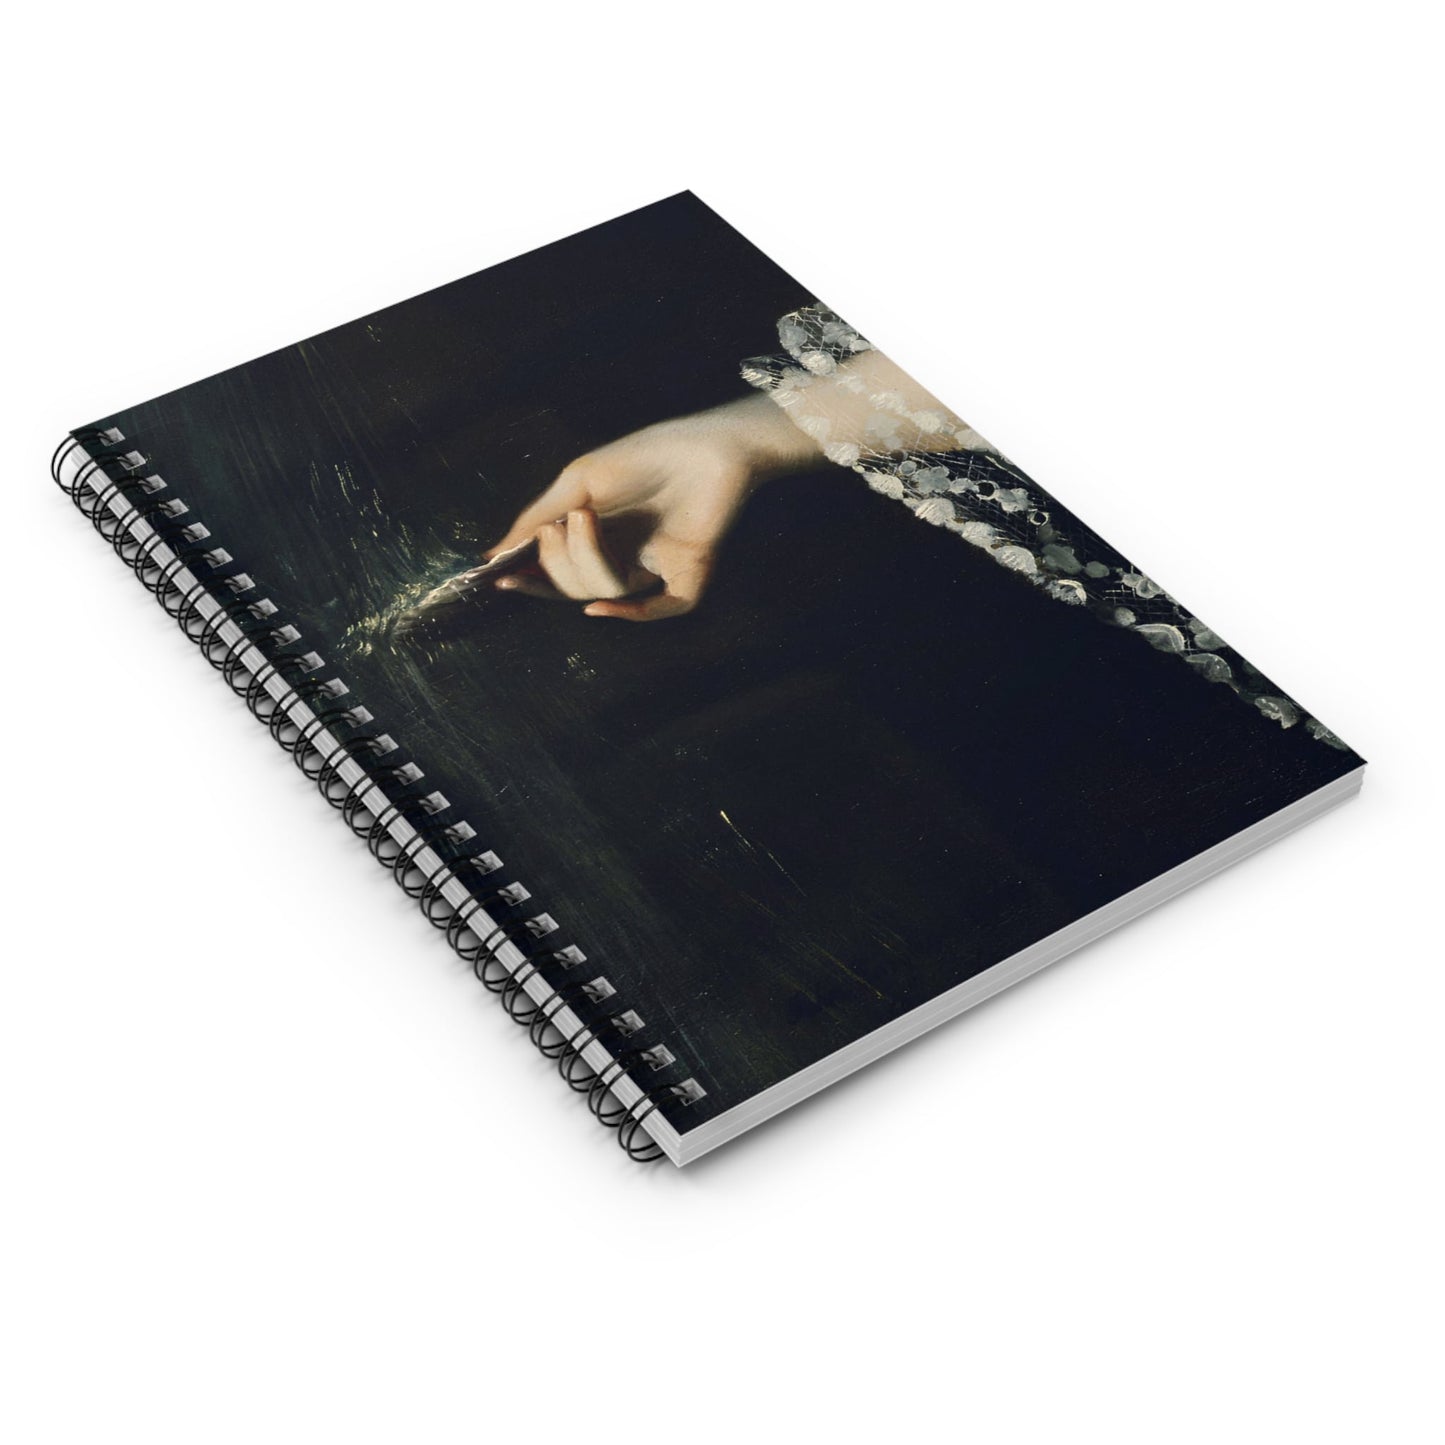 Moody Dark Academia Spiral Notebook Laying Flat on White Surface